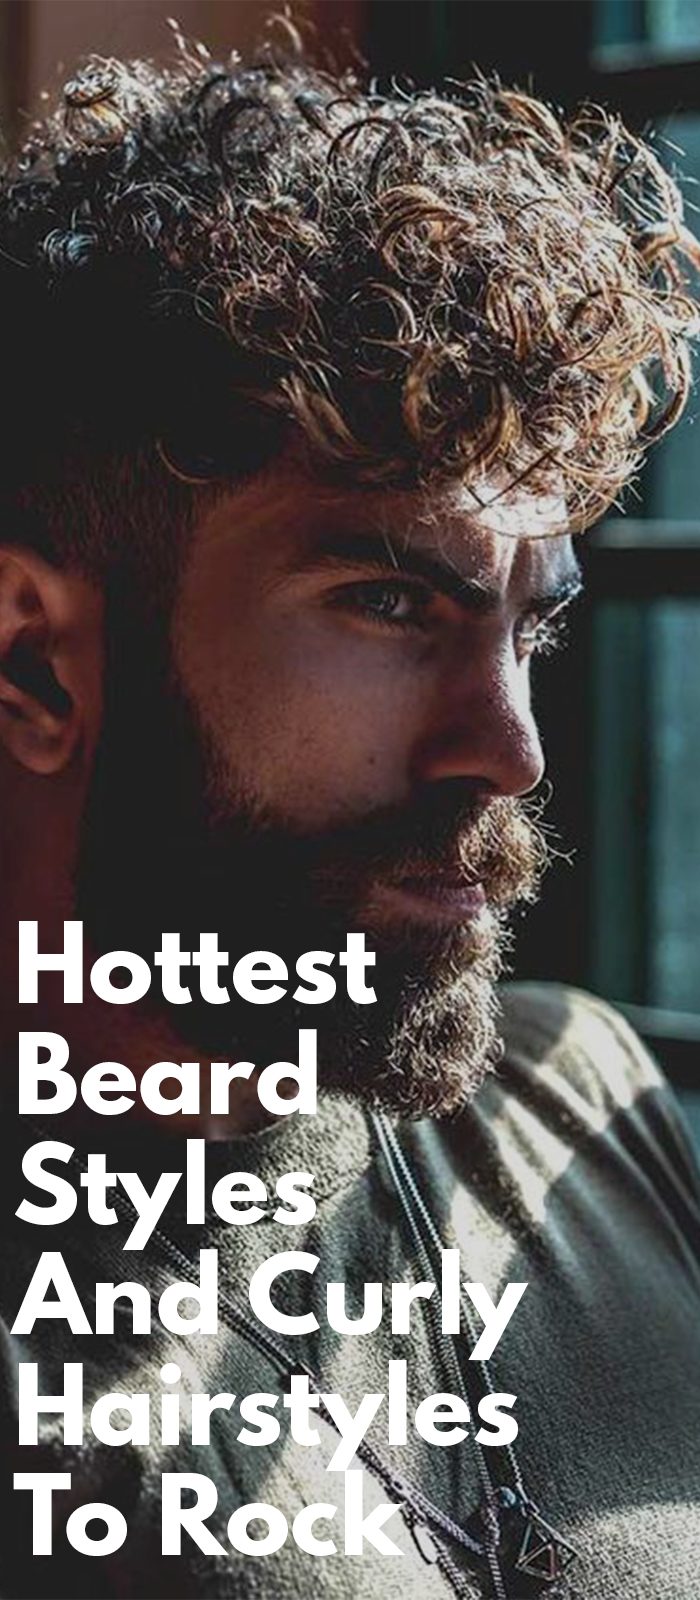 Hottest Beard Styles And Curly Hairstyles To Rock ⋆ Best Fashion Blog For  Men 